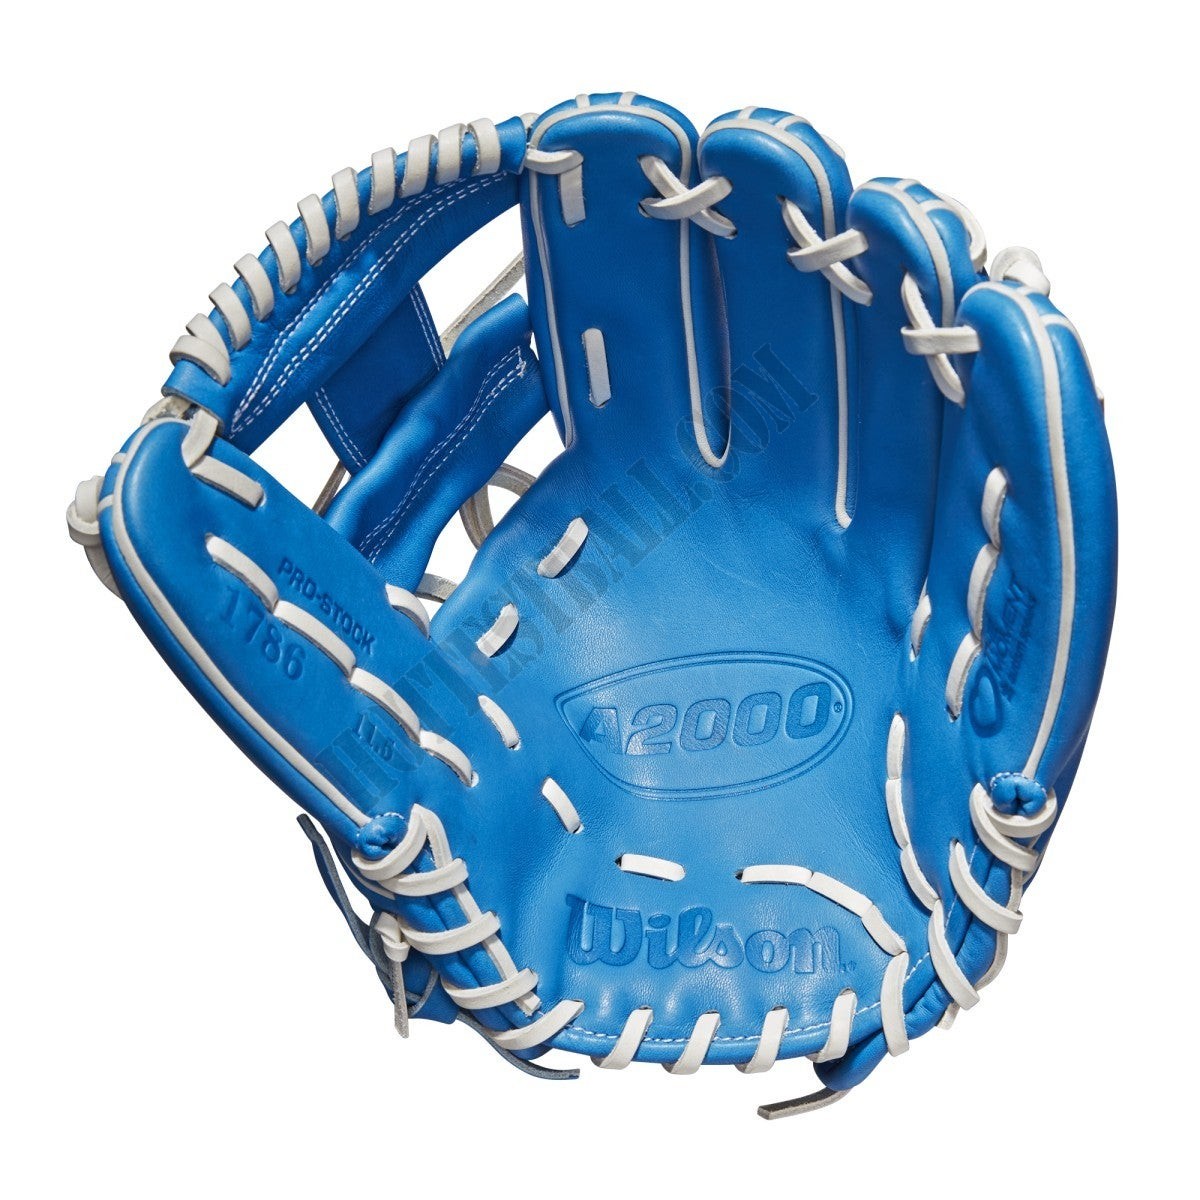 2022 Autism Speaks A2000 1786 11.5" Infield Baseball Glove - Limited Edition ● Wilson Promotions - -2